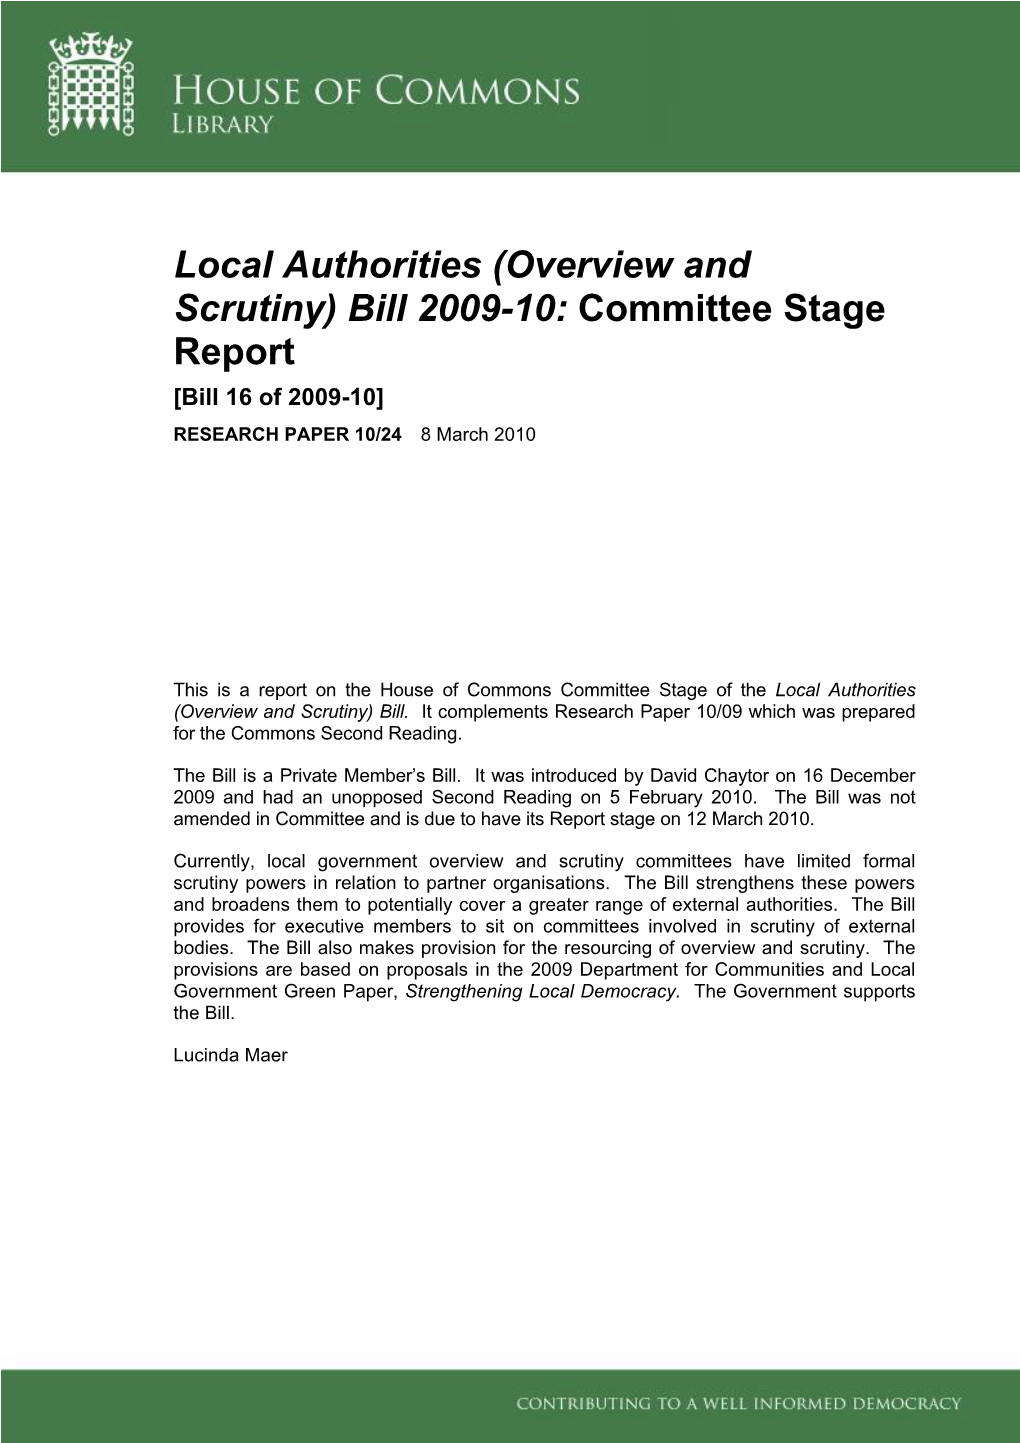 (Overview and Scrutiny) Bill 2009-10: Committee Stage Report [Bill 16 of 2009-10] RESEARCH PAPER 10/24 8 March 2010